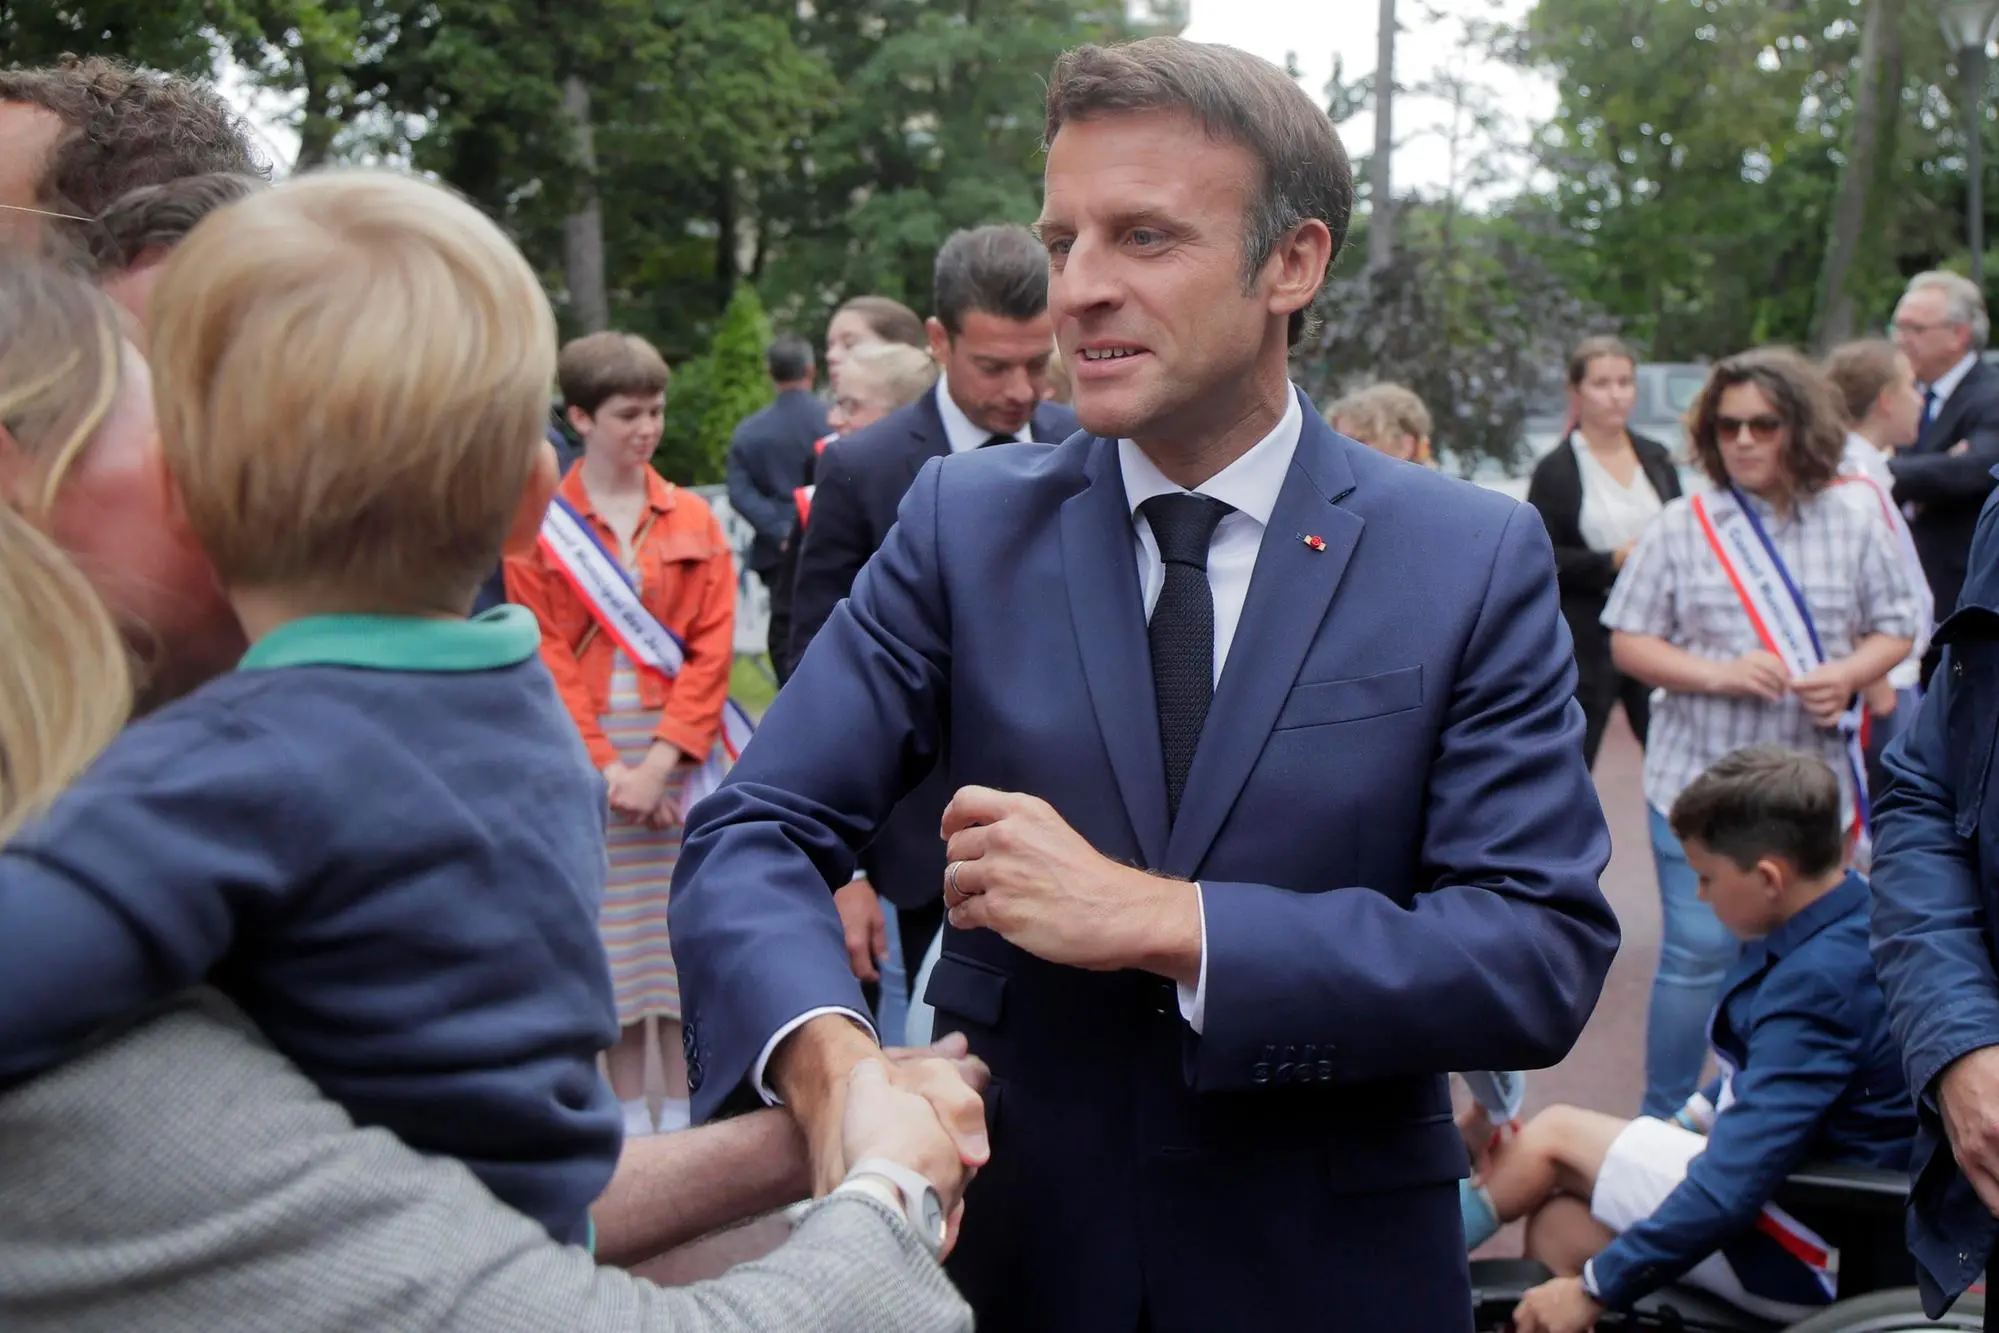 epa10021881 French President Emmanuel Macron cheers supporters before voting in Le Touquet, northern France, 19 June 2022. French voters are going to the polls in the final round of key parliamentary elections that will demonstrate how much legroom President Emmanuel Macron’s party will be given to implement his ambitious domestic agenda. EPA/Michel Spingler / POOL MAXPPP OUT